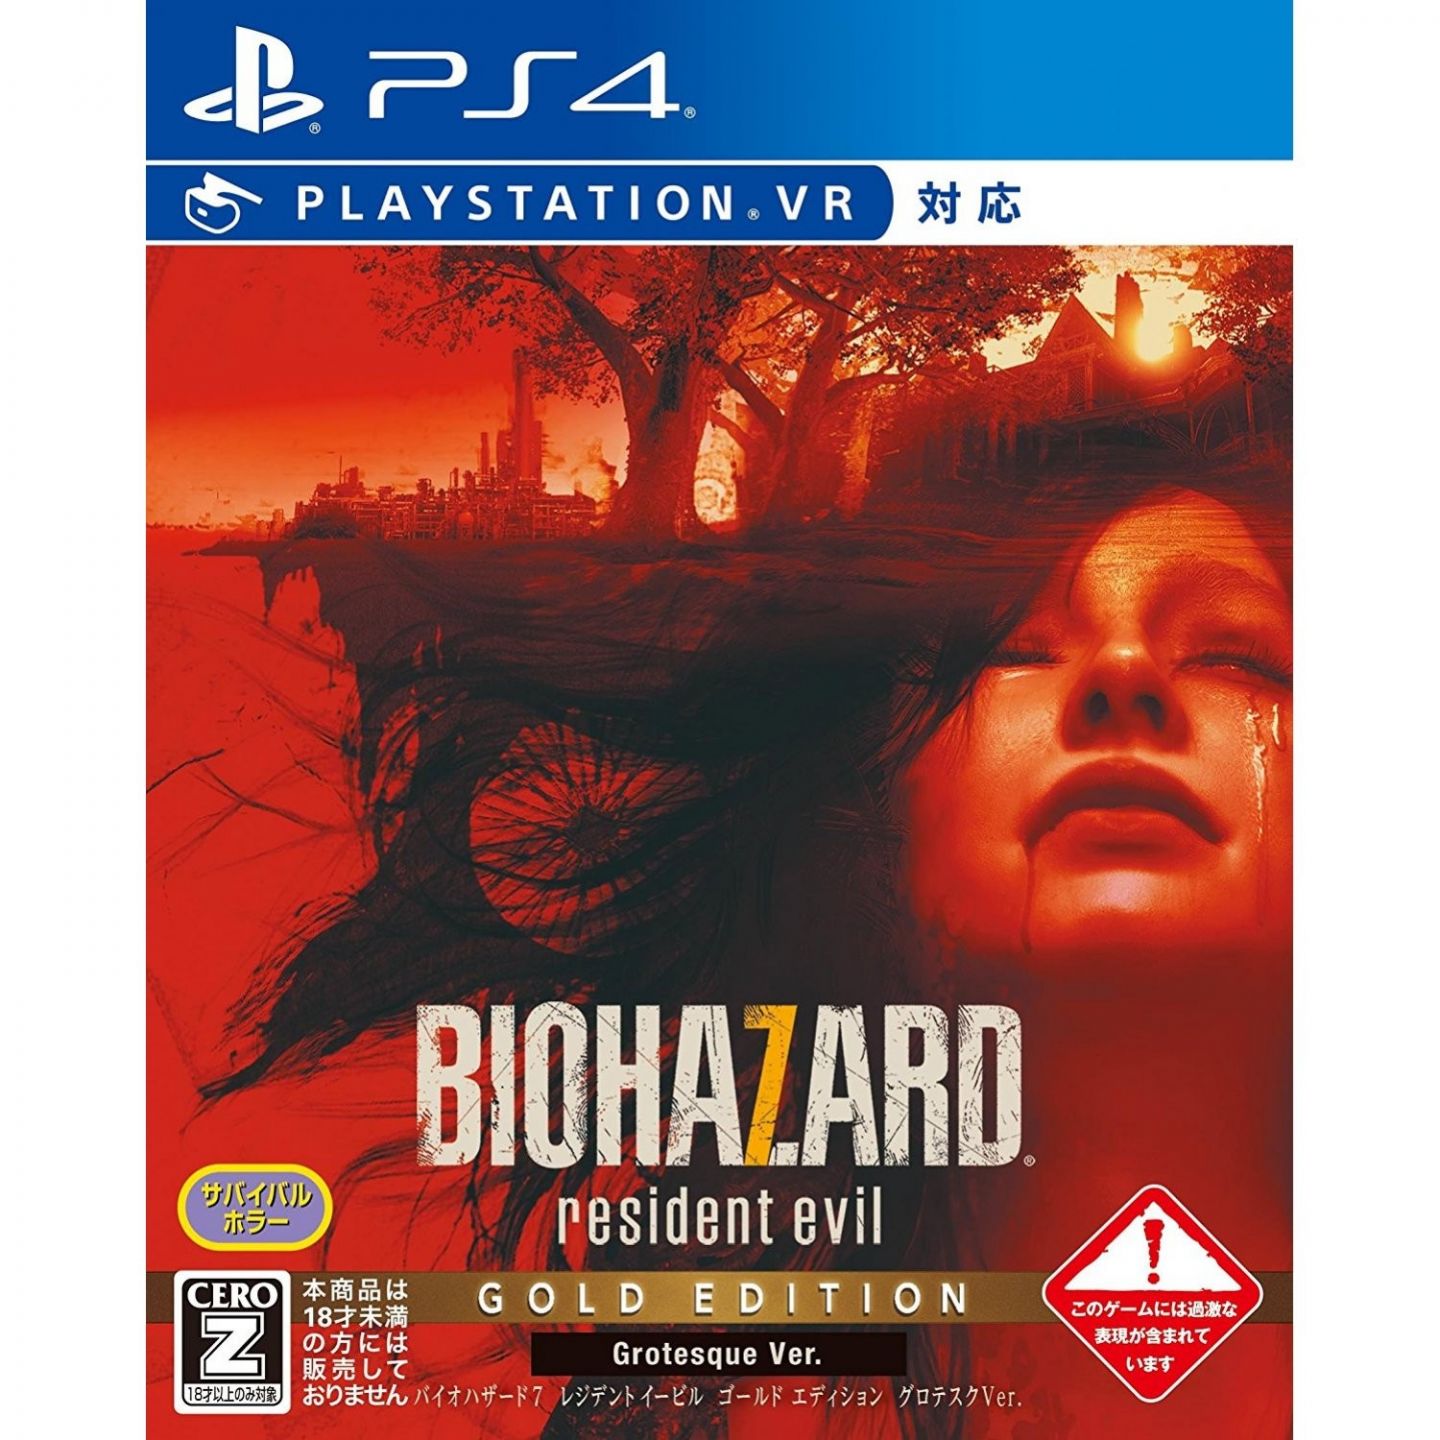 Resident 7 gold edition. Resident Evil 7 ps4. Resident Evil Biohazard Gold Edition ps4. Резидент 7 обложка. Resident Evil 7 Biohazard Gold Edition.